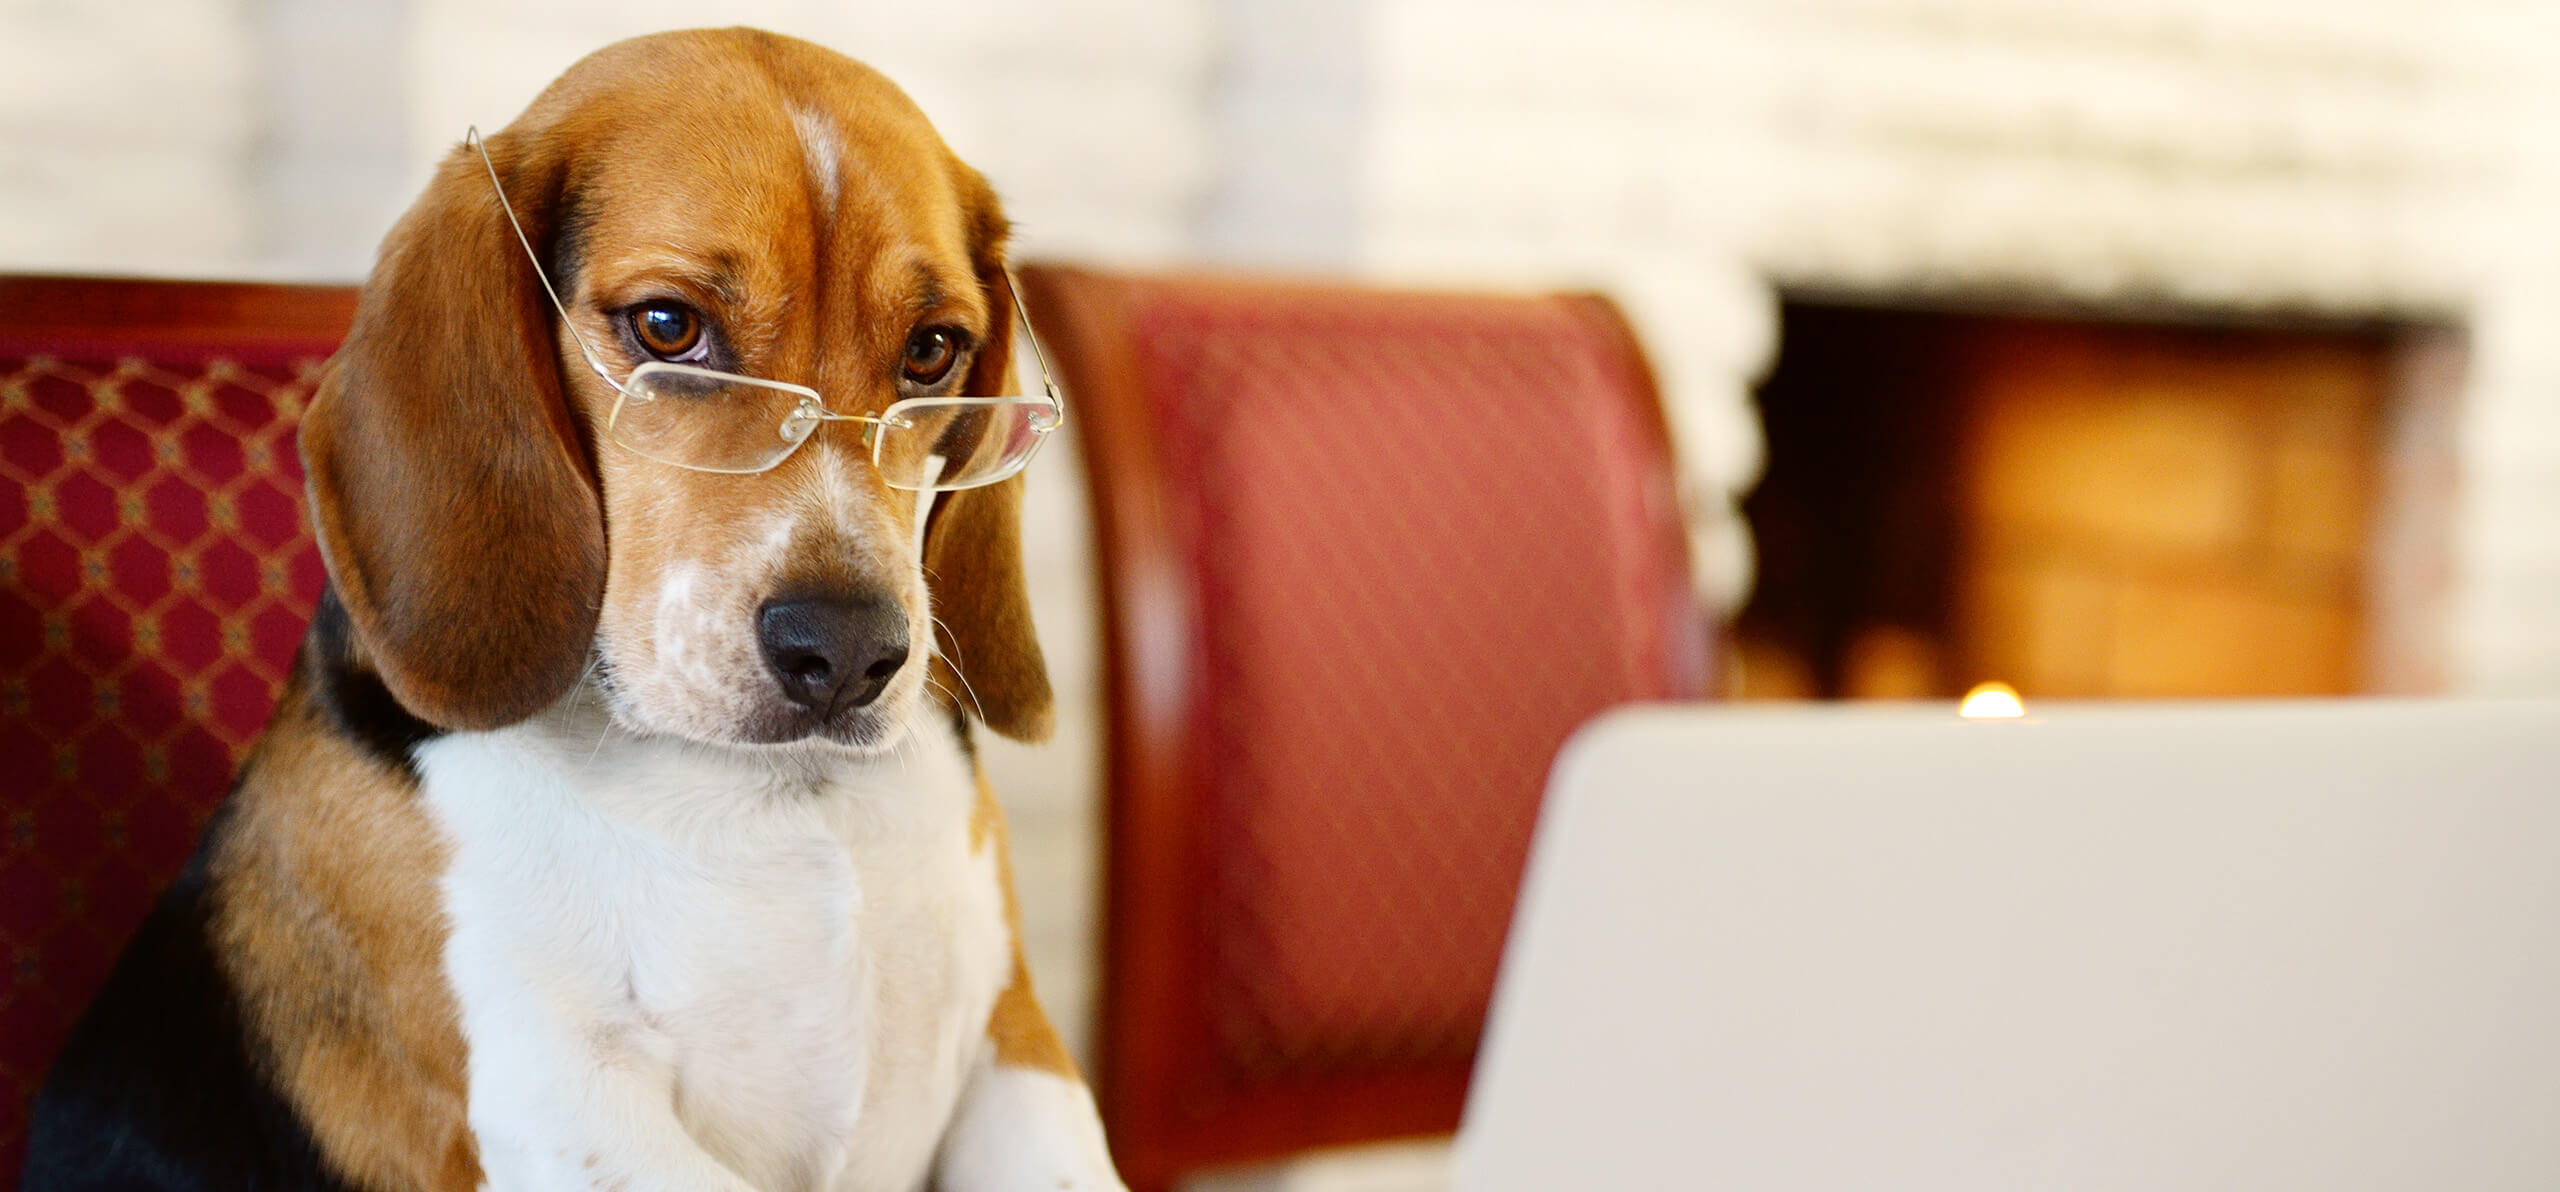 dog wearing glasses sitting a chair in front of a laptop